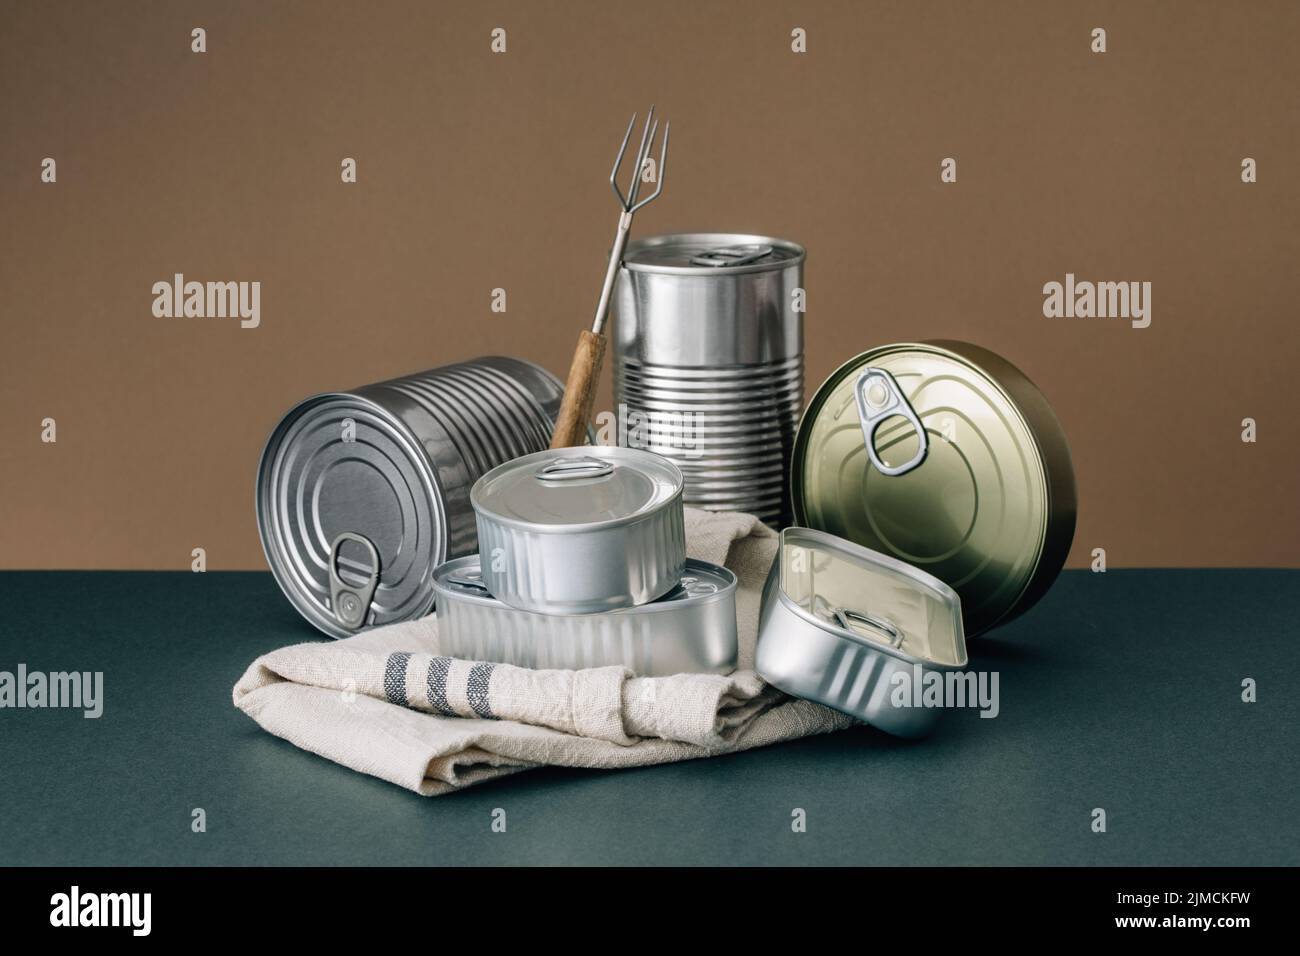 Stacked unopened cans on cloth on a brown and green background Stock Photo